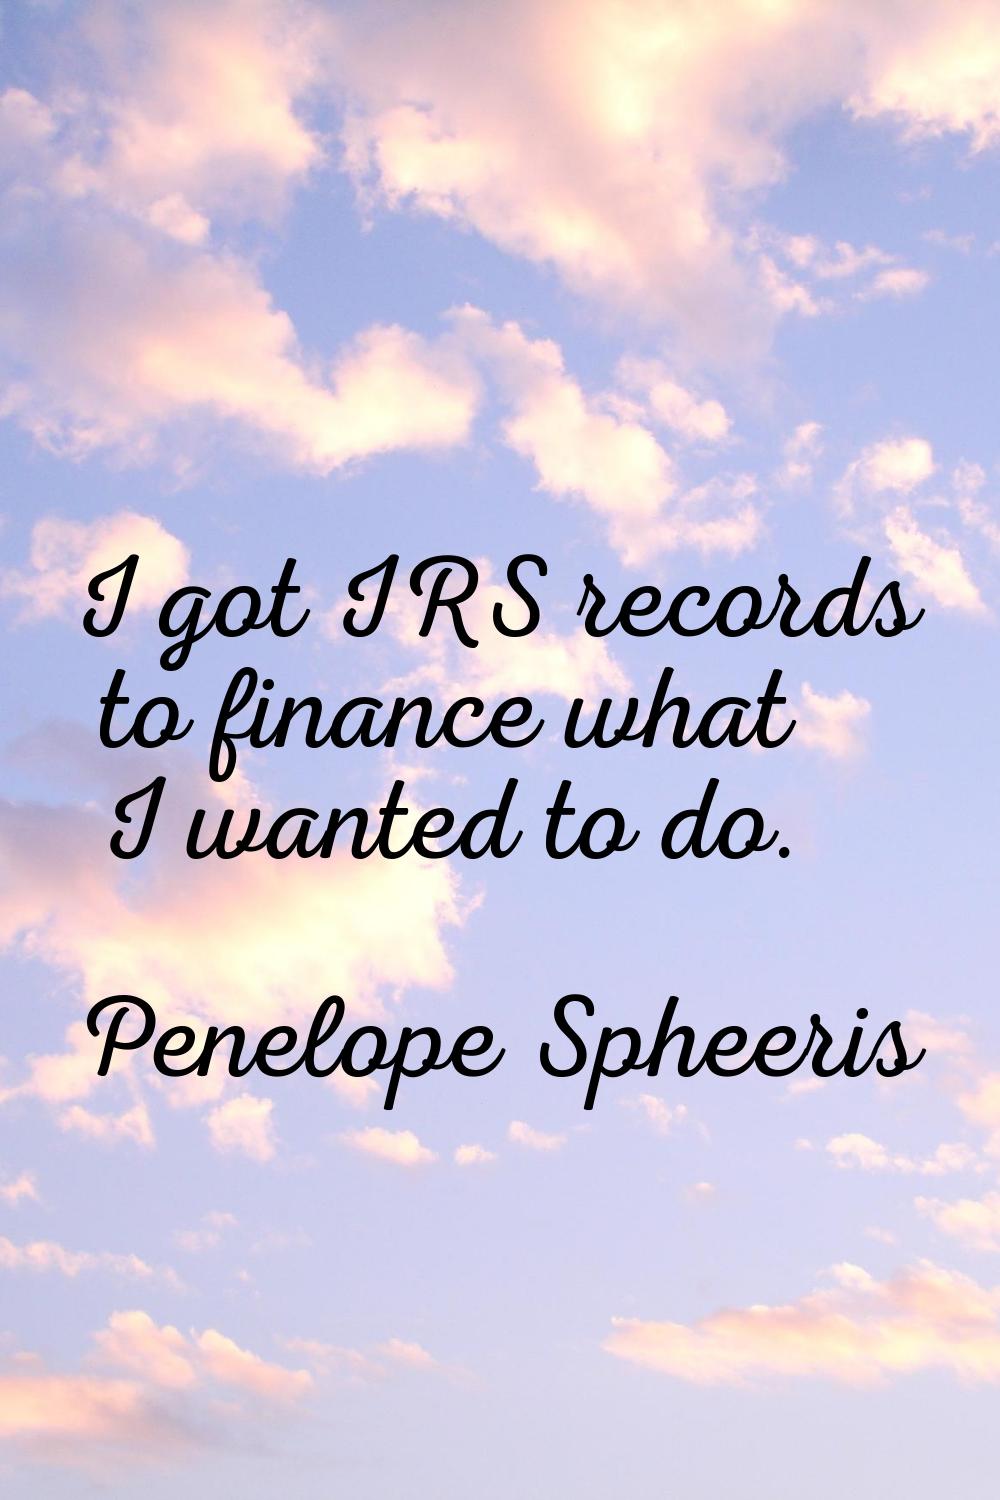 I got IRS records to finance what I wanted to do.